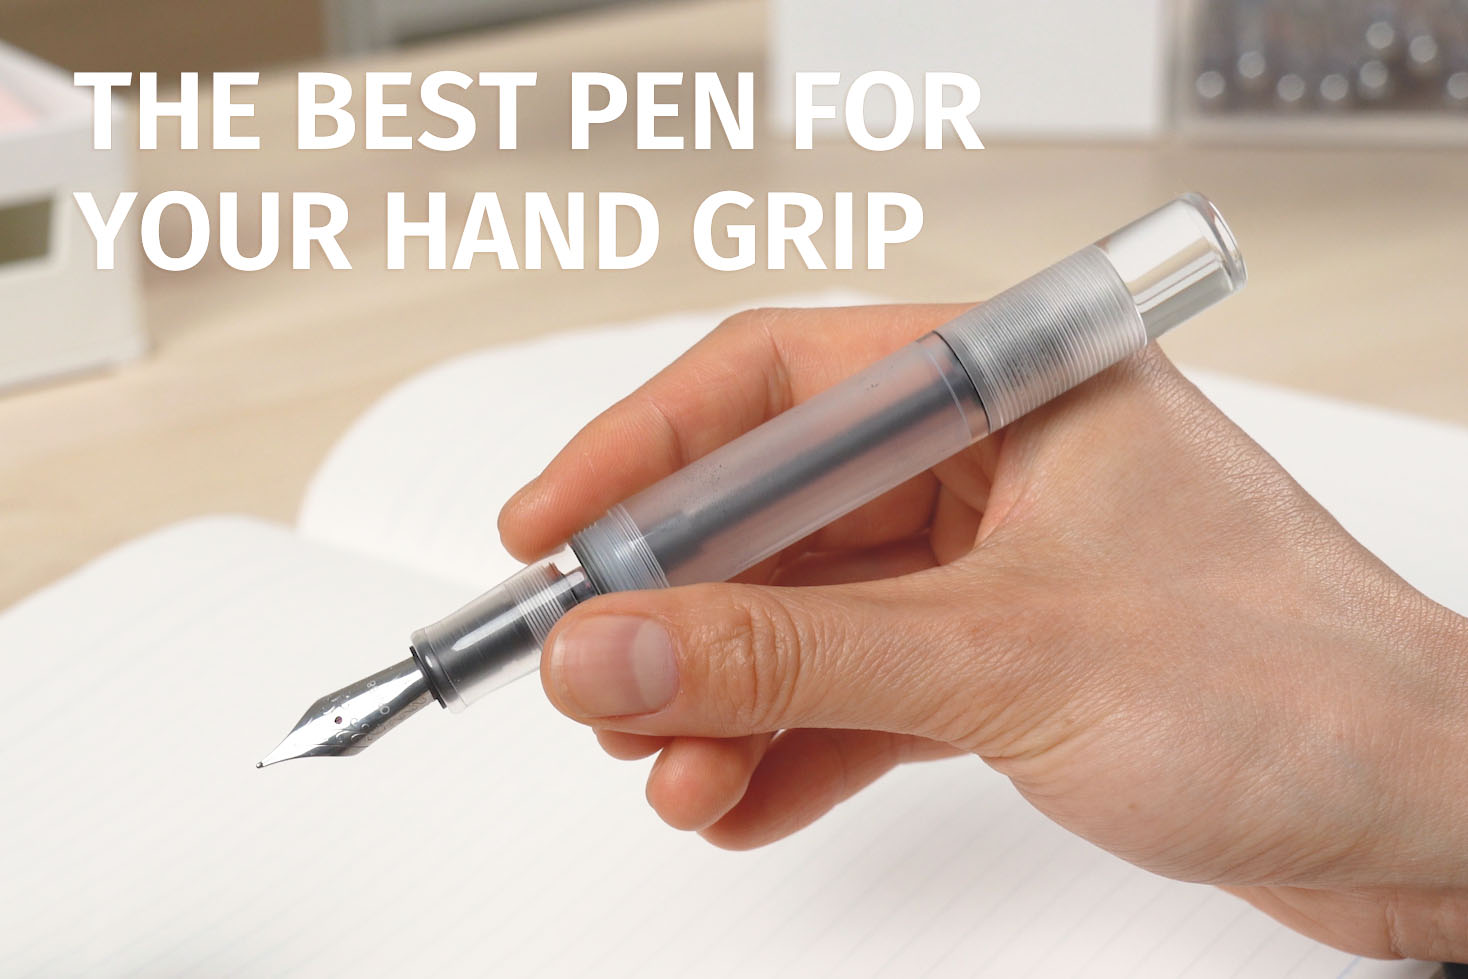 The Best Pen for Your Hand Grip